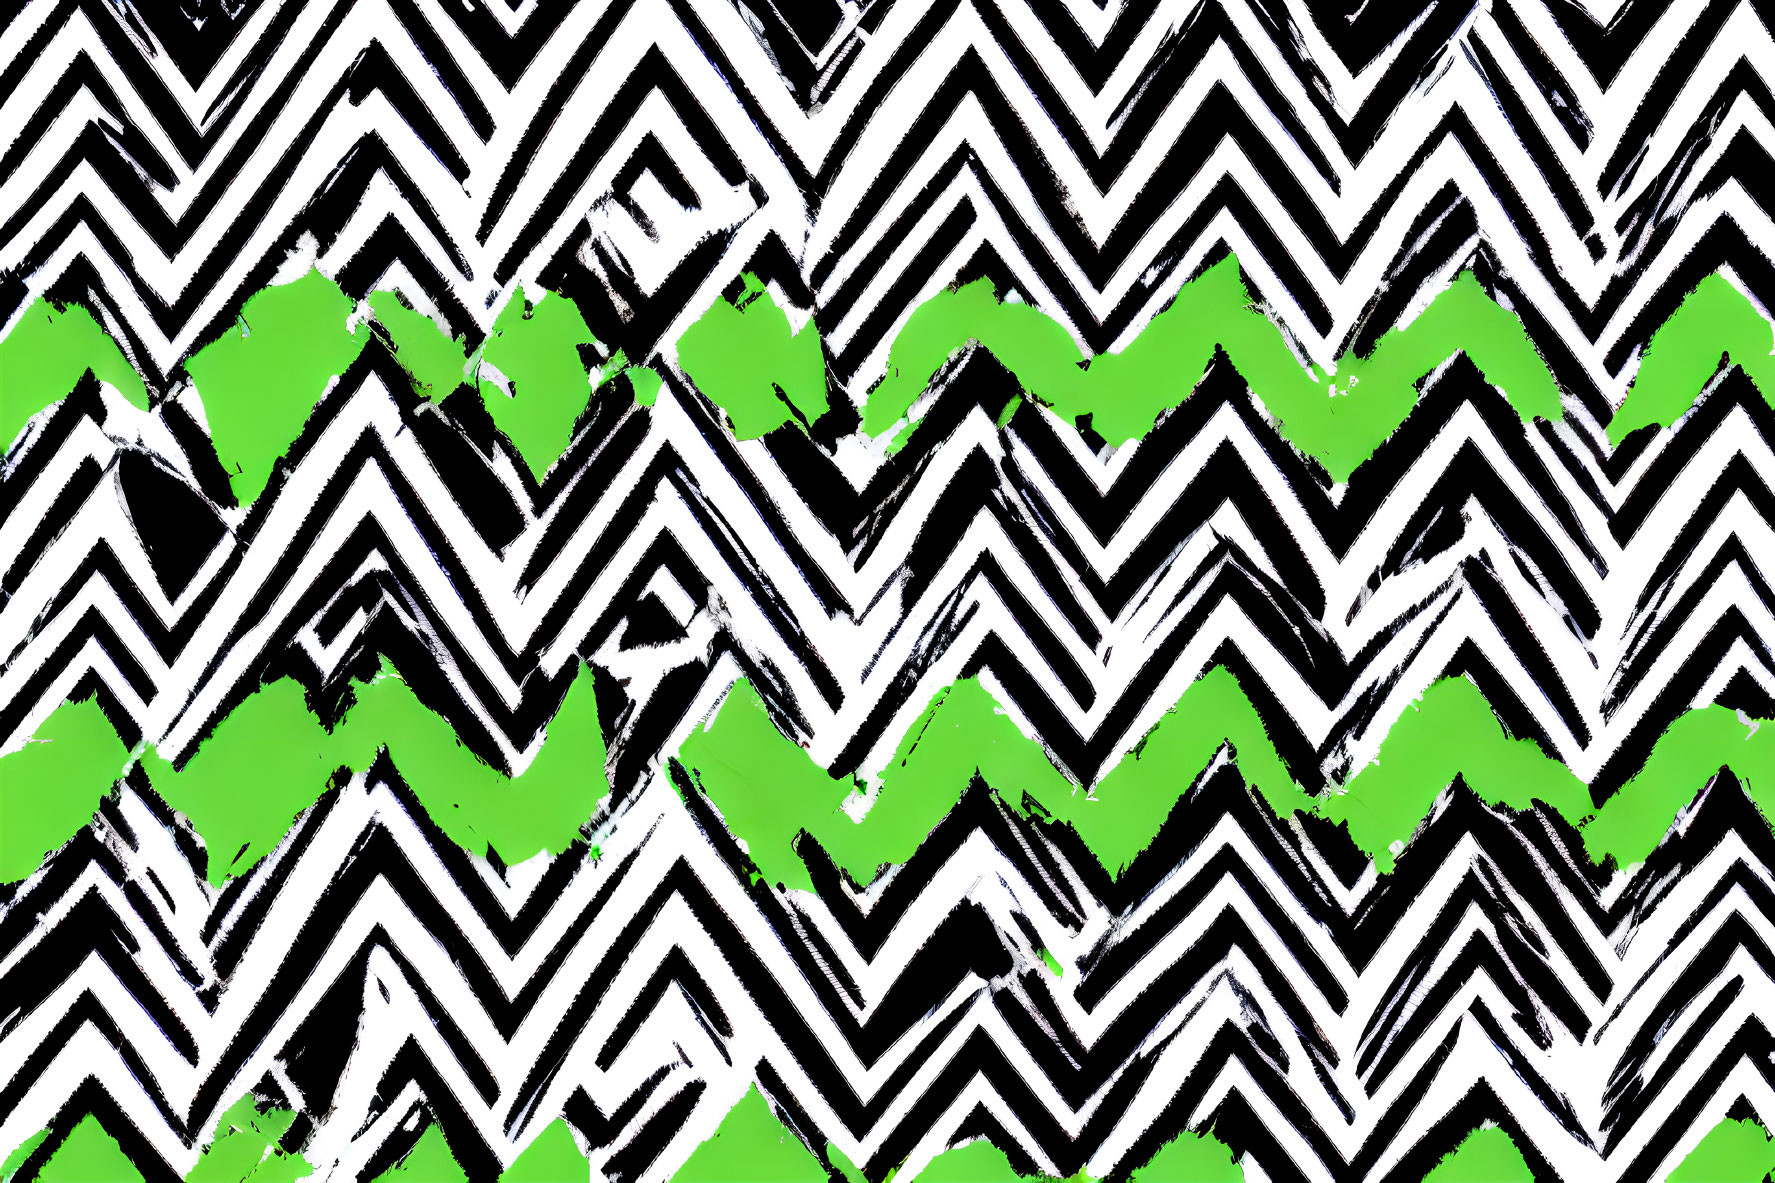 Bold Black and White Chevron Pattern with Bright Green Brushstrokes